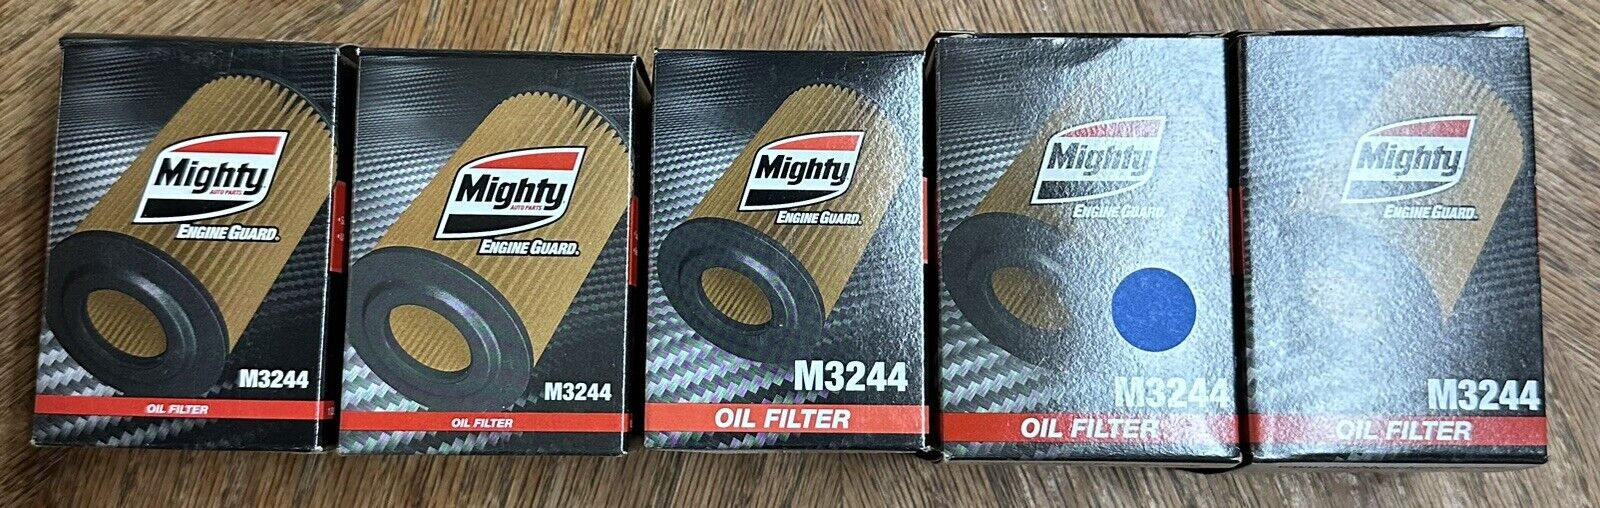 Engine Oil Filter Mighty M3244